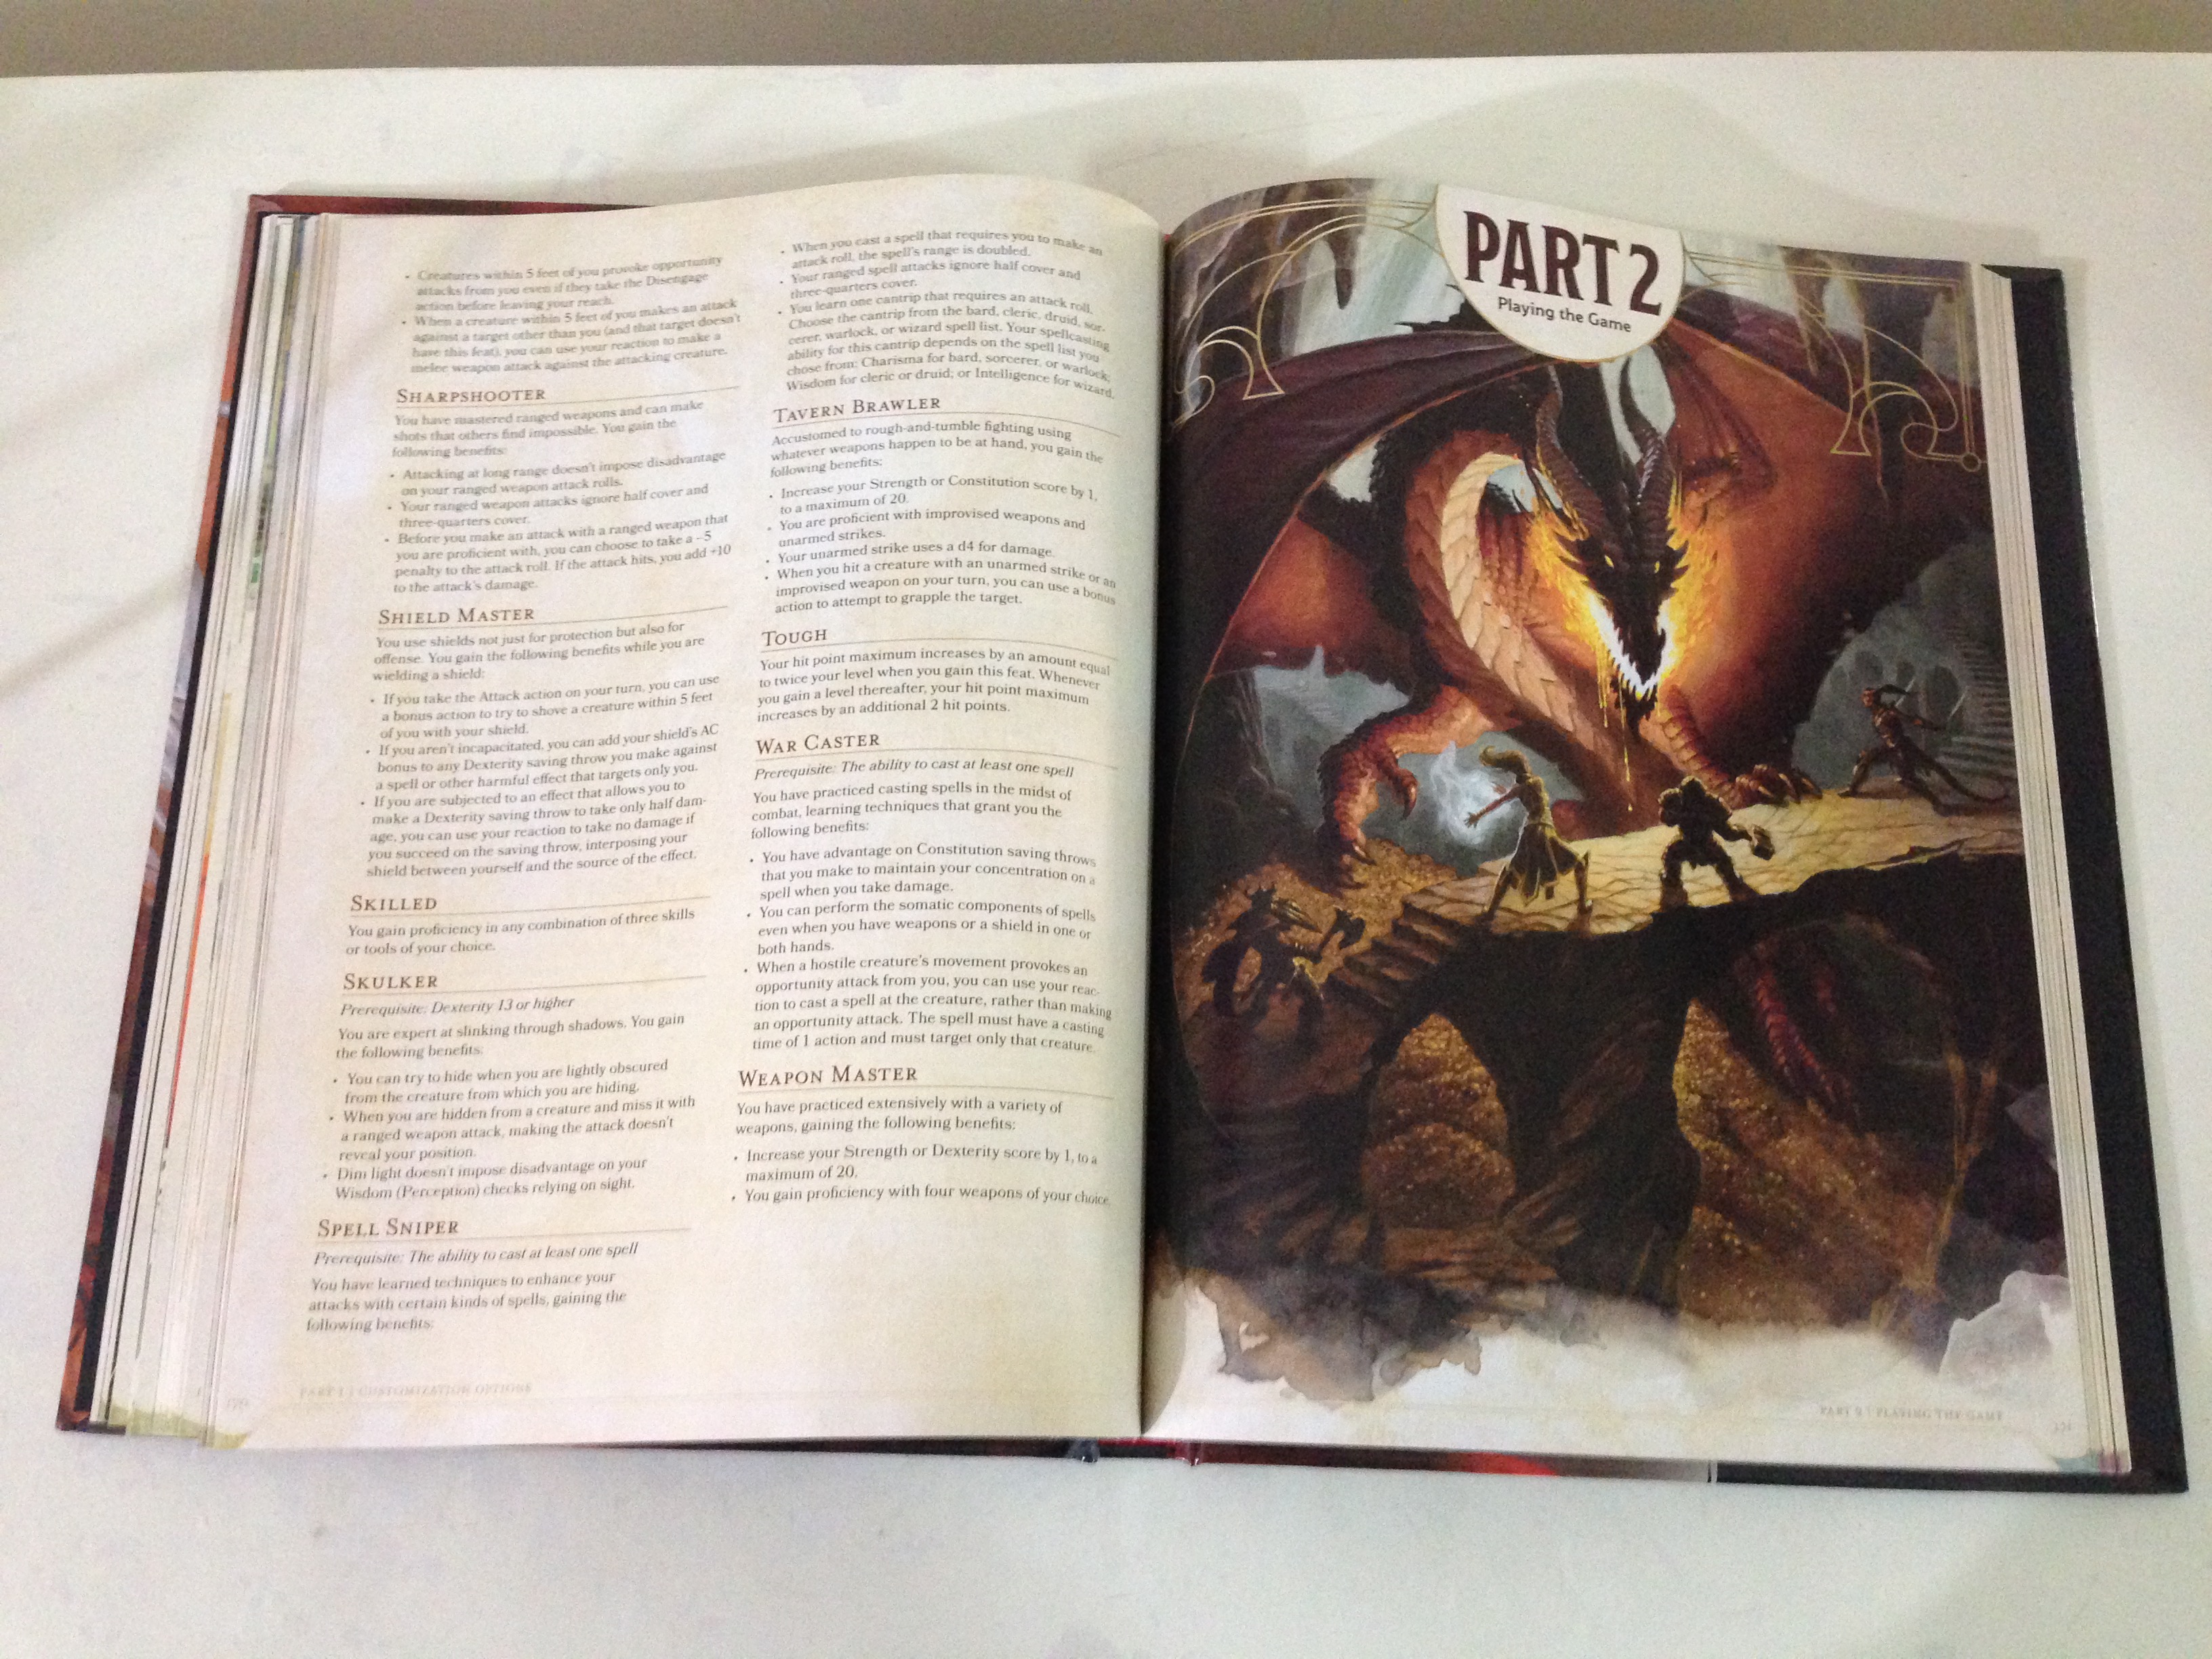 Layout of Player's Handbook, A Core Rulebook for Dungeons & Dragons 5th Edition